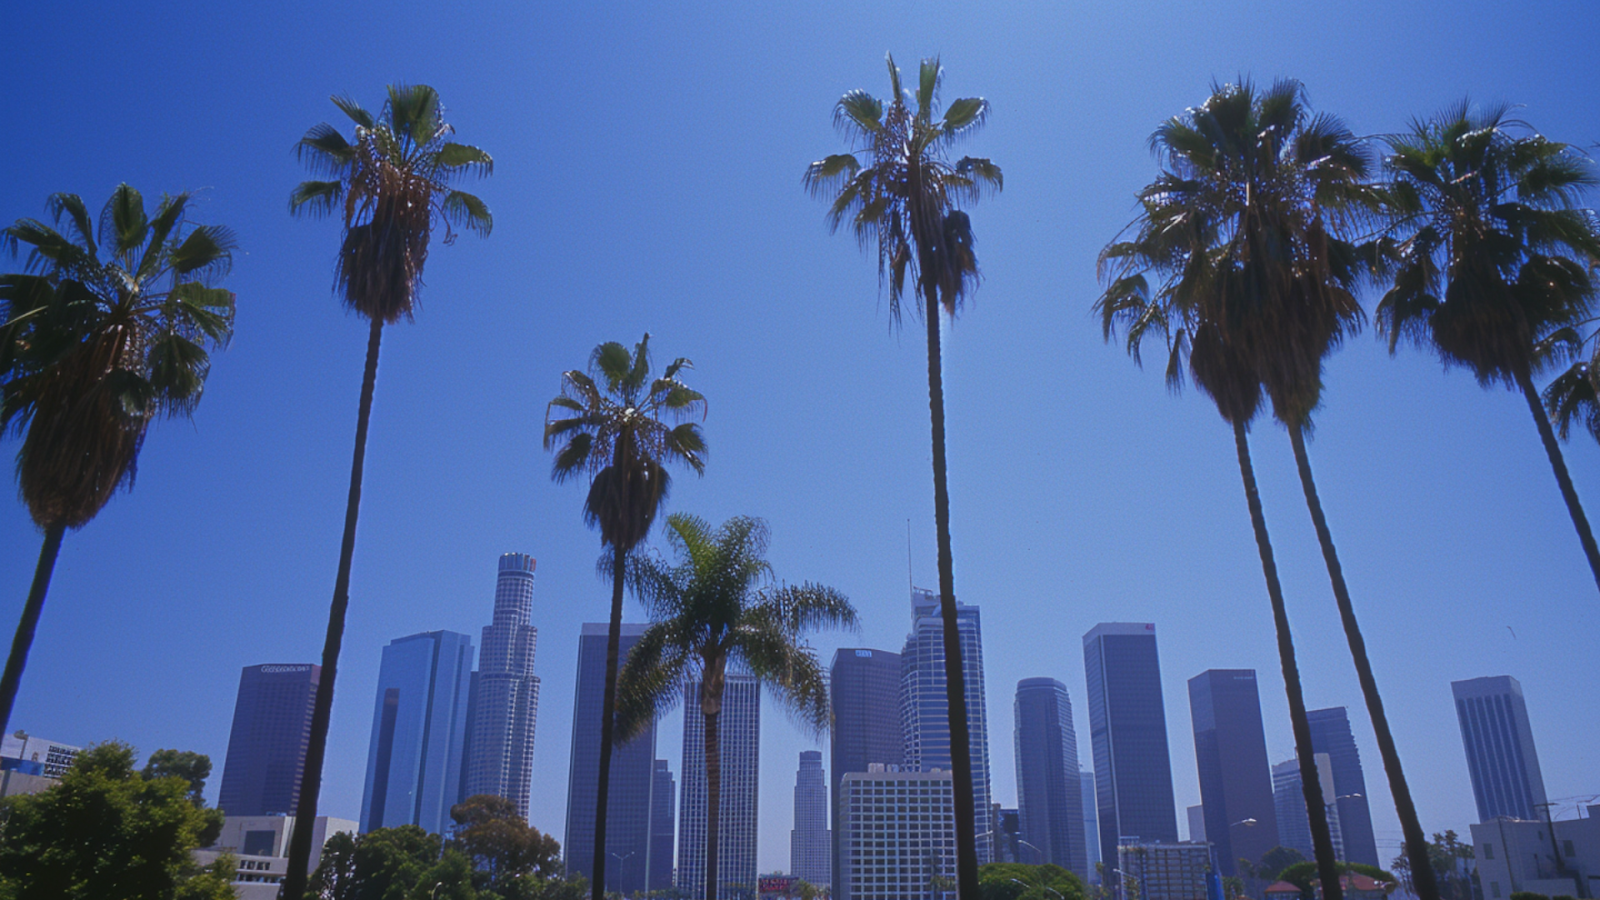 The city skyline of Los Angeles with palm trees in the foreground